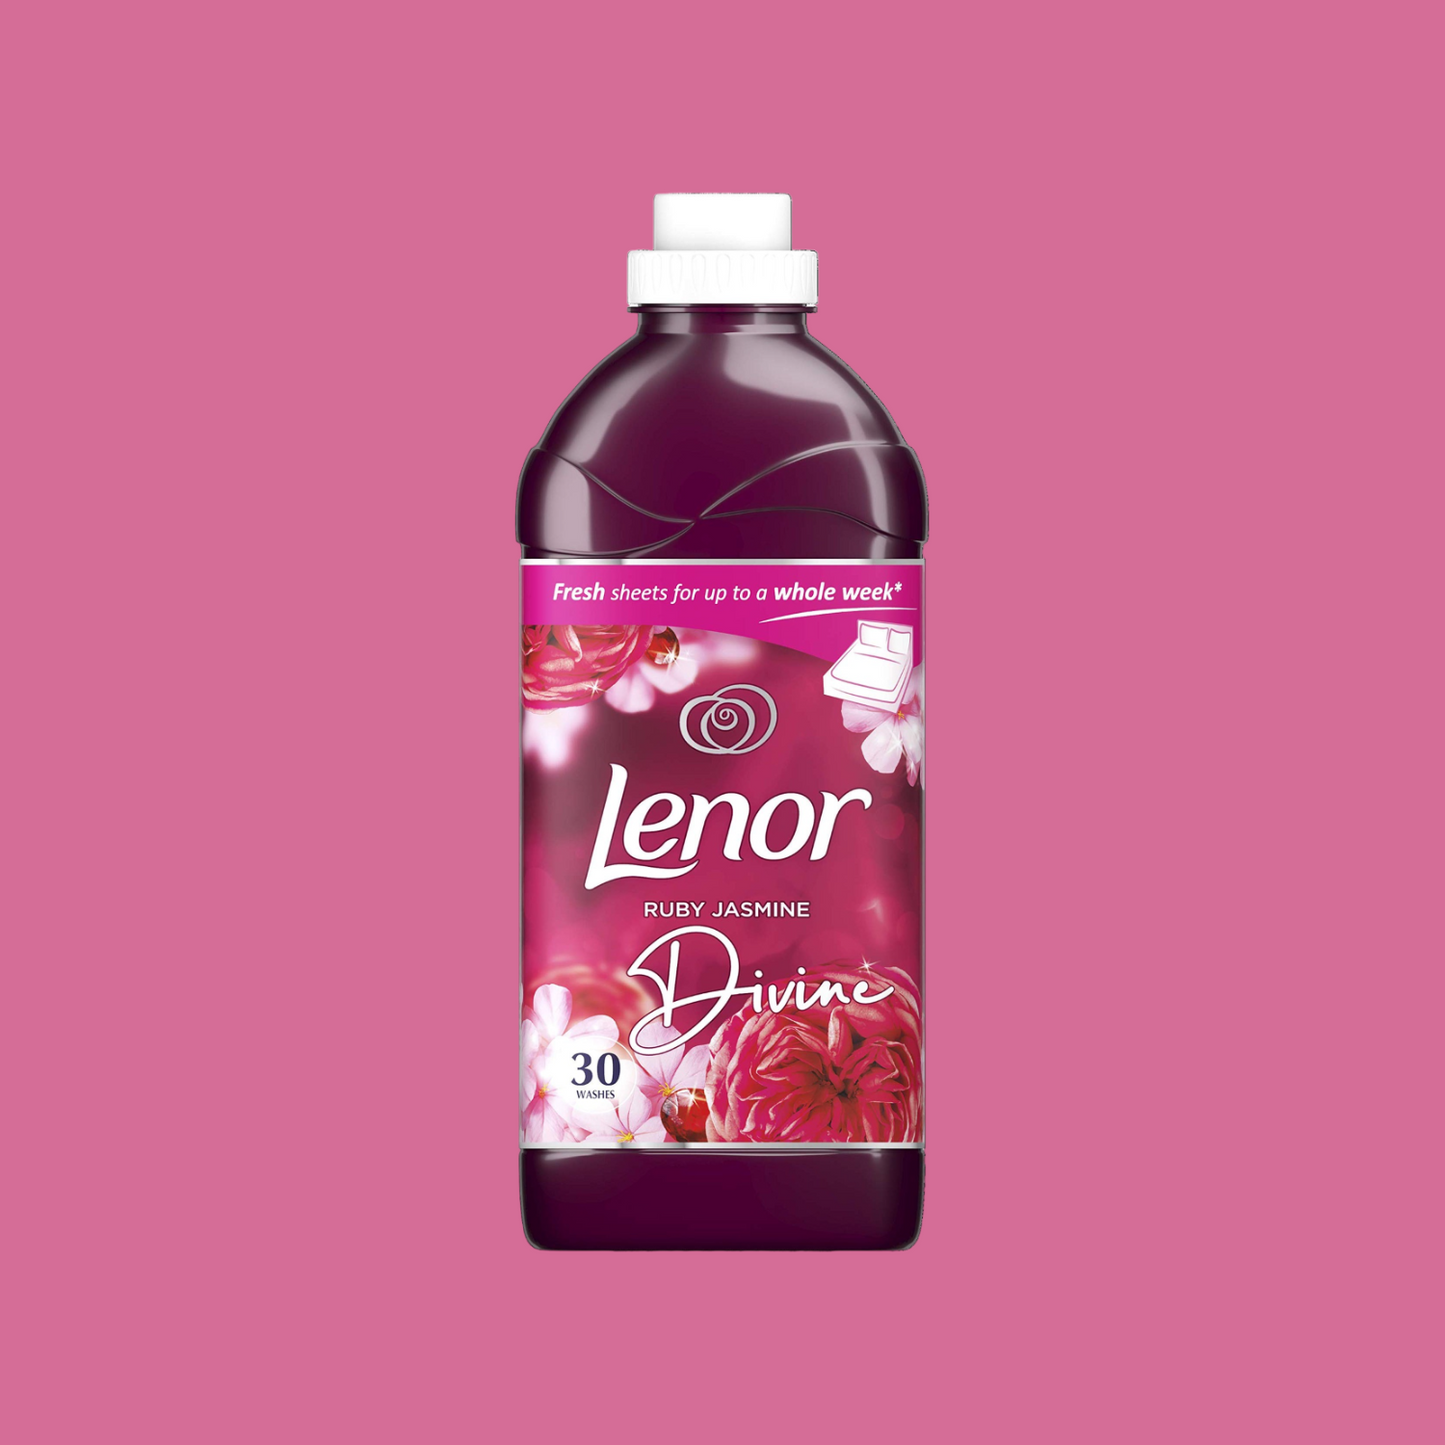 Lenor Ruby Jasmine Fabric Conditioner 1.05 Litre 30 washes